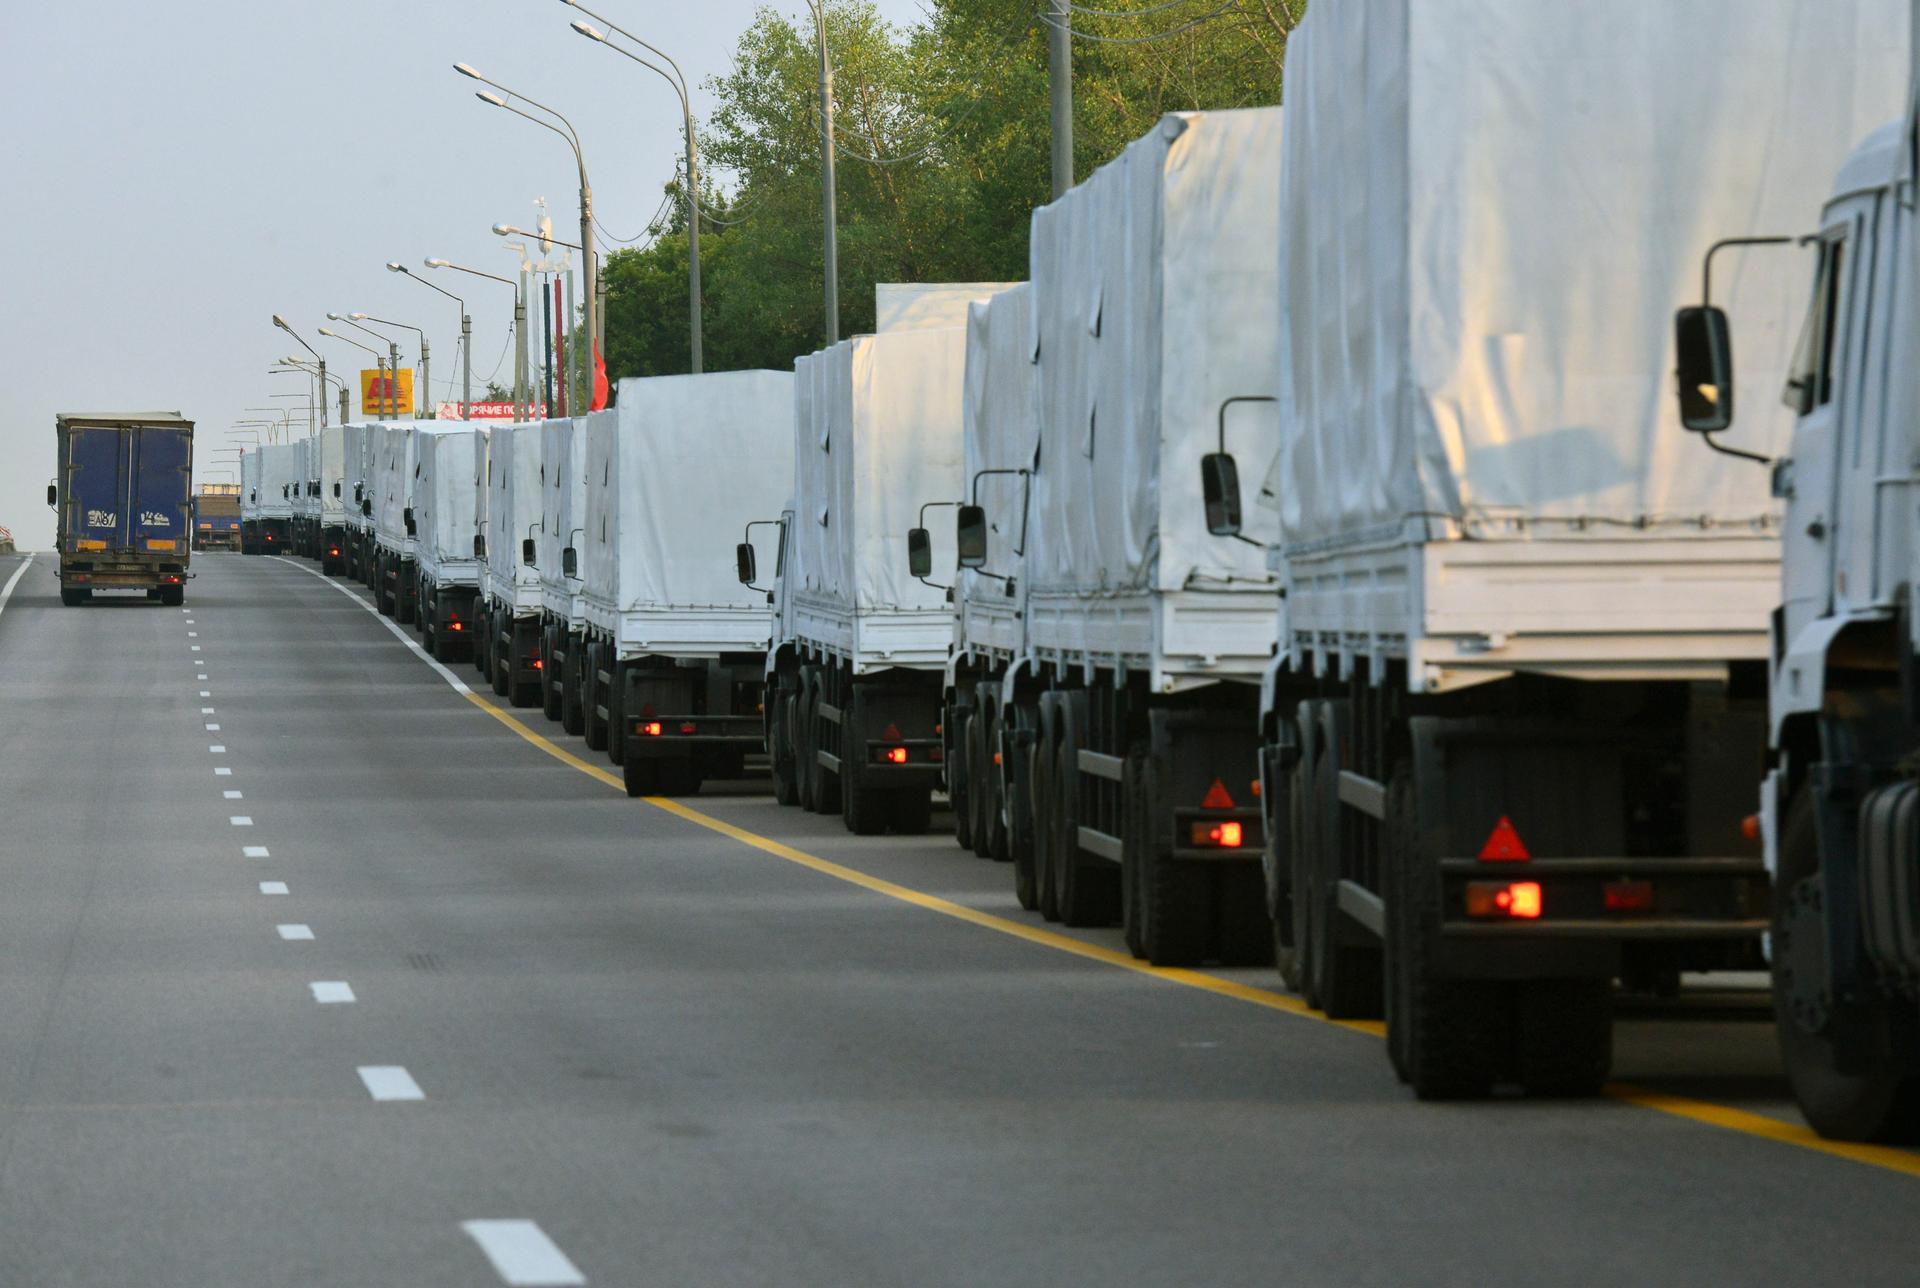 A Russian convoy of trucks carrying humanitarian aid for Ukraine stops along a road in the city of Voronezh August 12, 2014. The convoy carrying tons of humanitarian aid left on Tuesday for eastern Ukraine, where government forces are closing in on pro-Ru